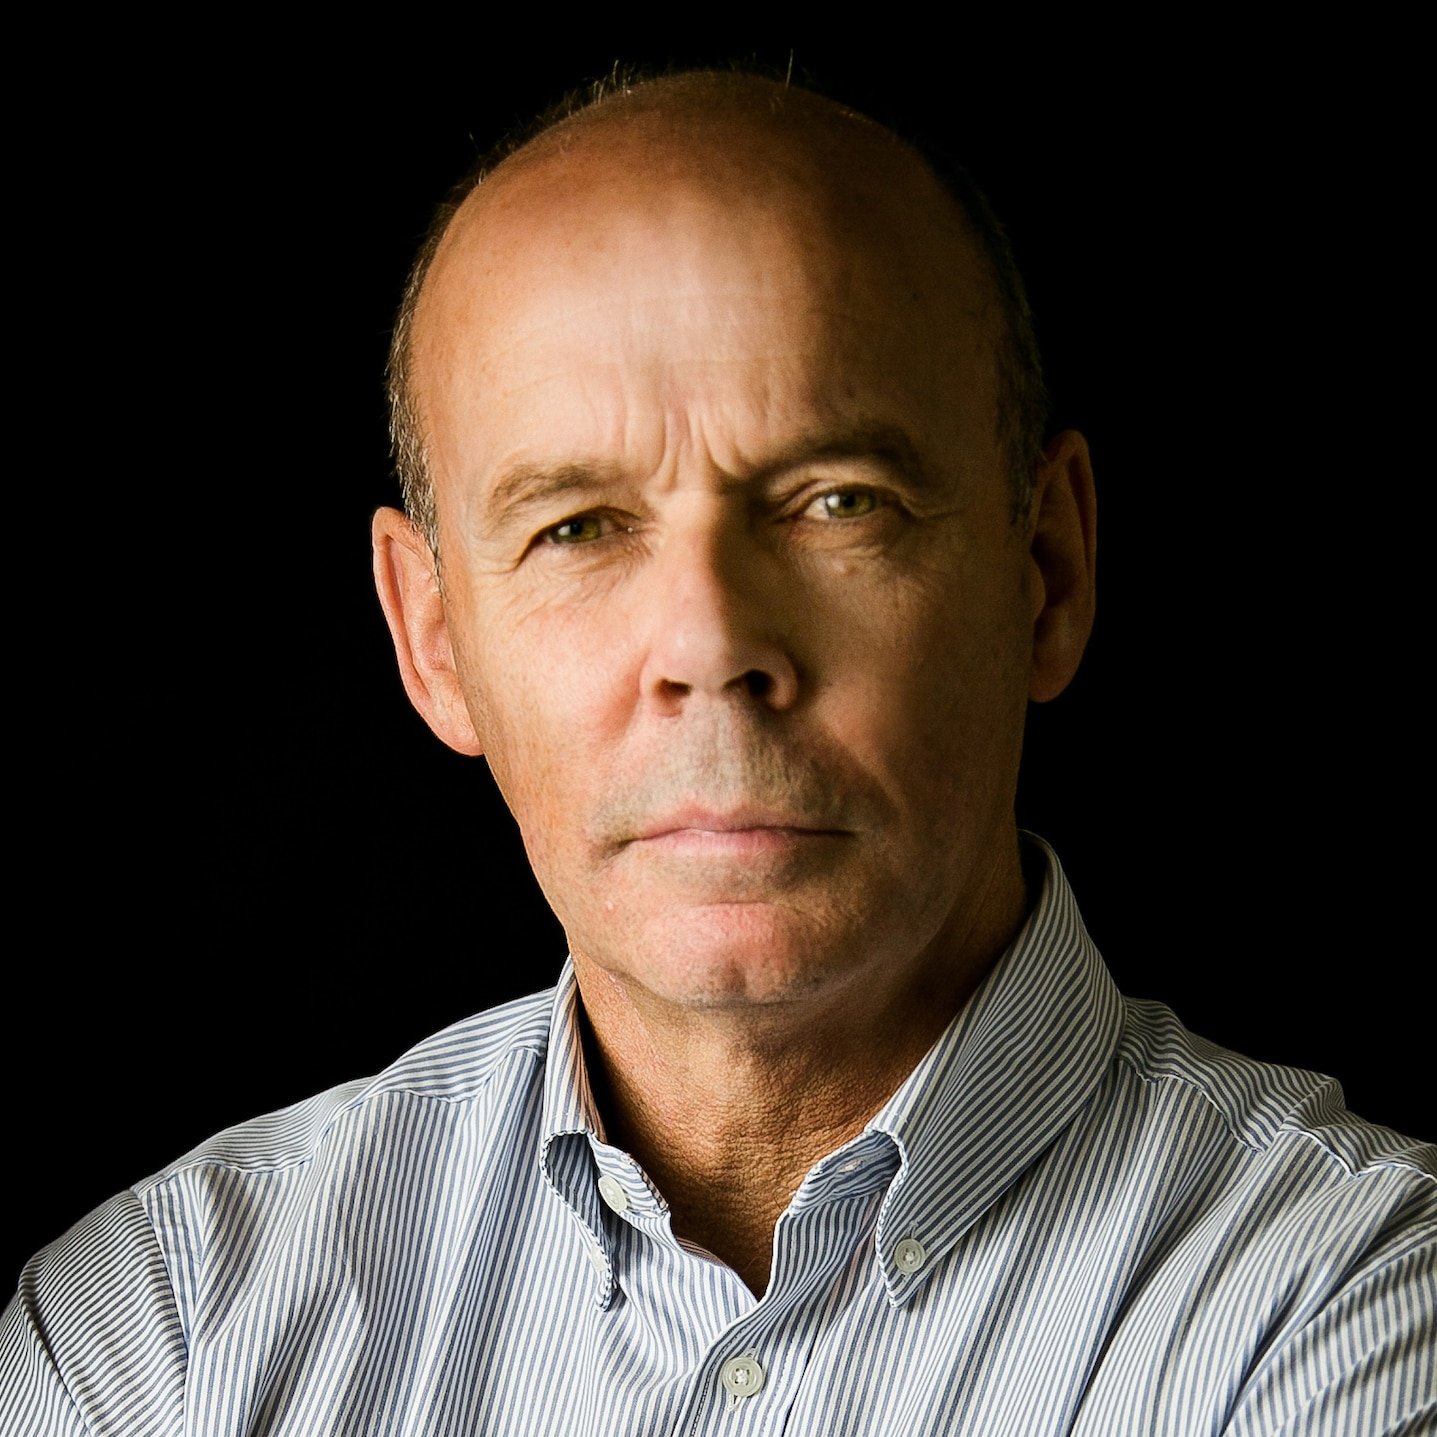 Sir-Clive-Woodward-England-Rugby-World-Cup-Coach-Director-Sport-Team-GB-Hive-Learning-Leadership-inspirational-speaker-at-Great-British-Speakers